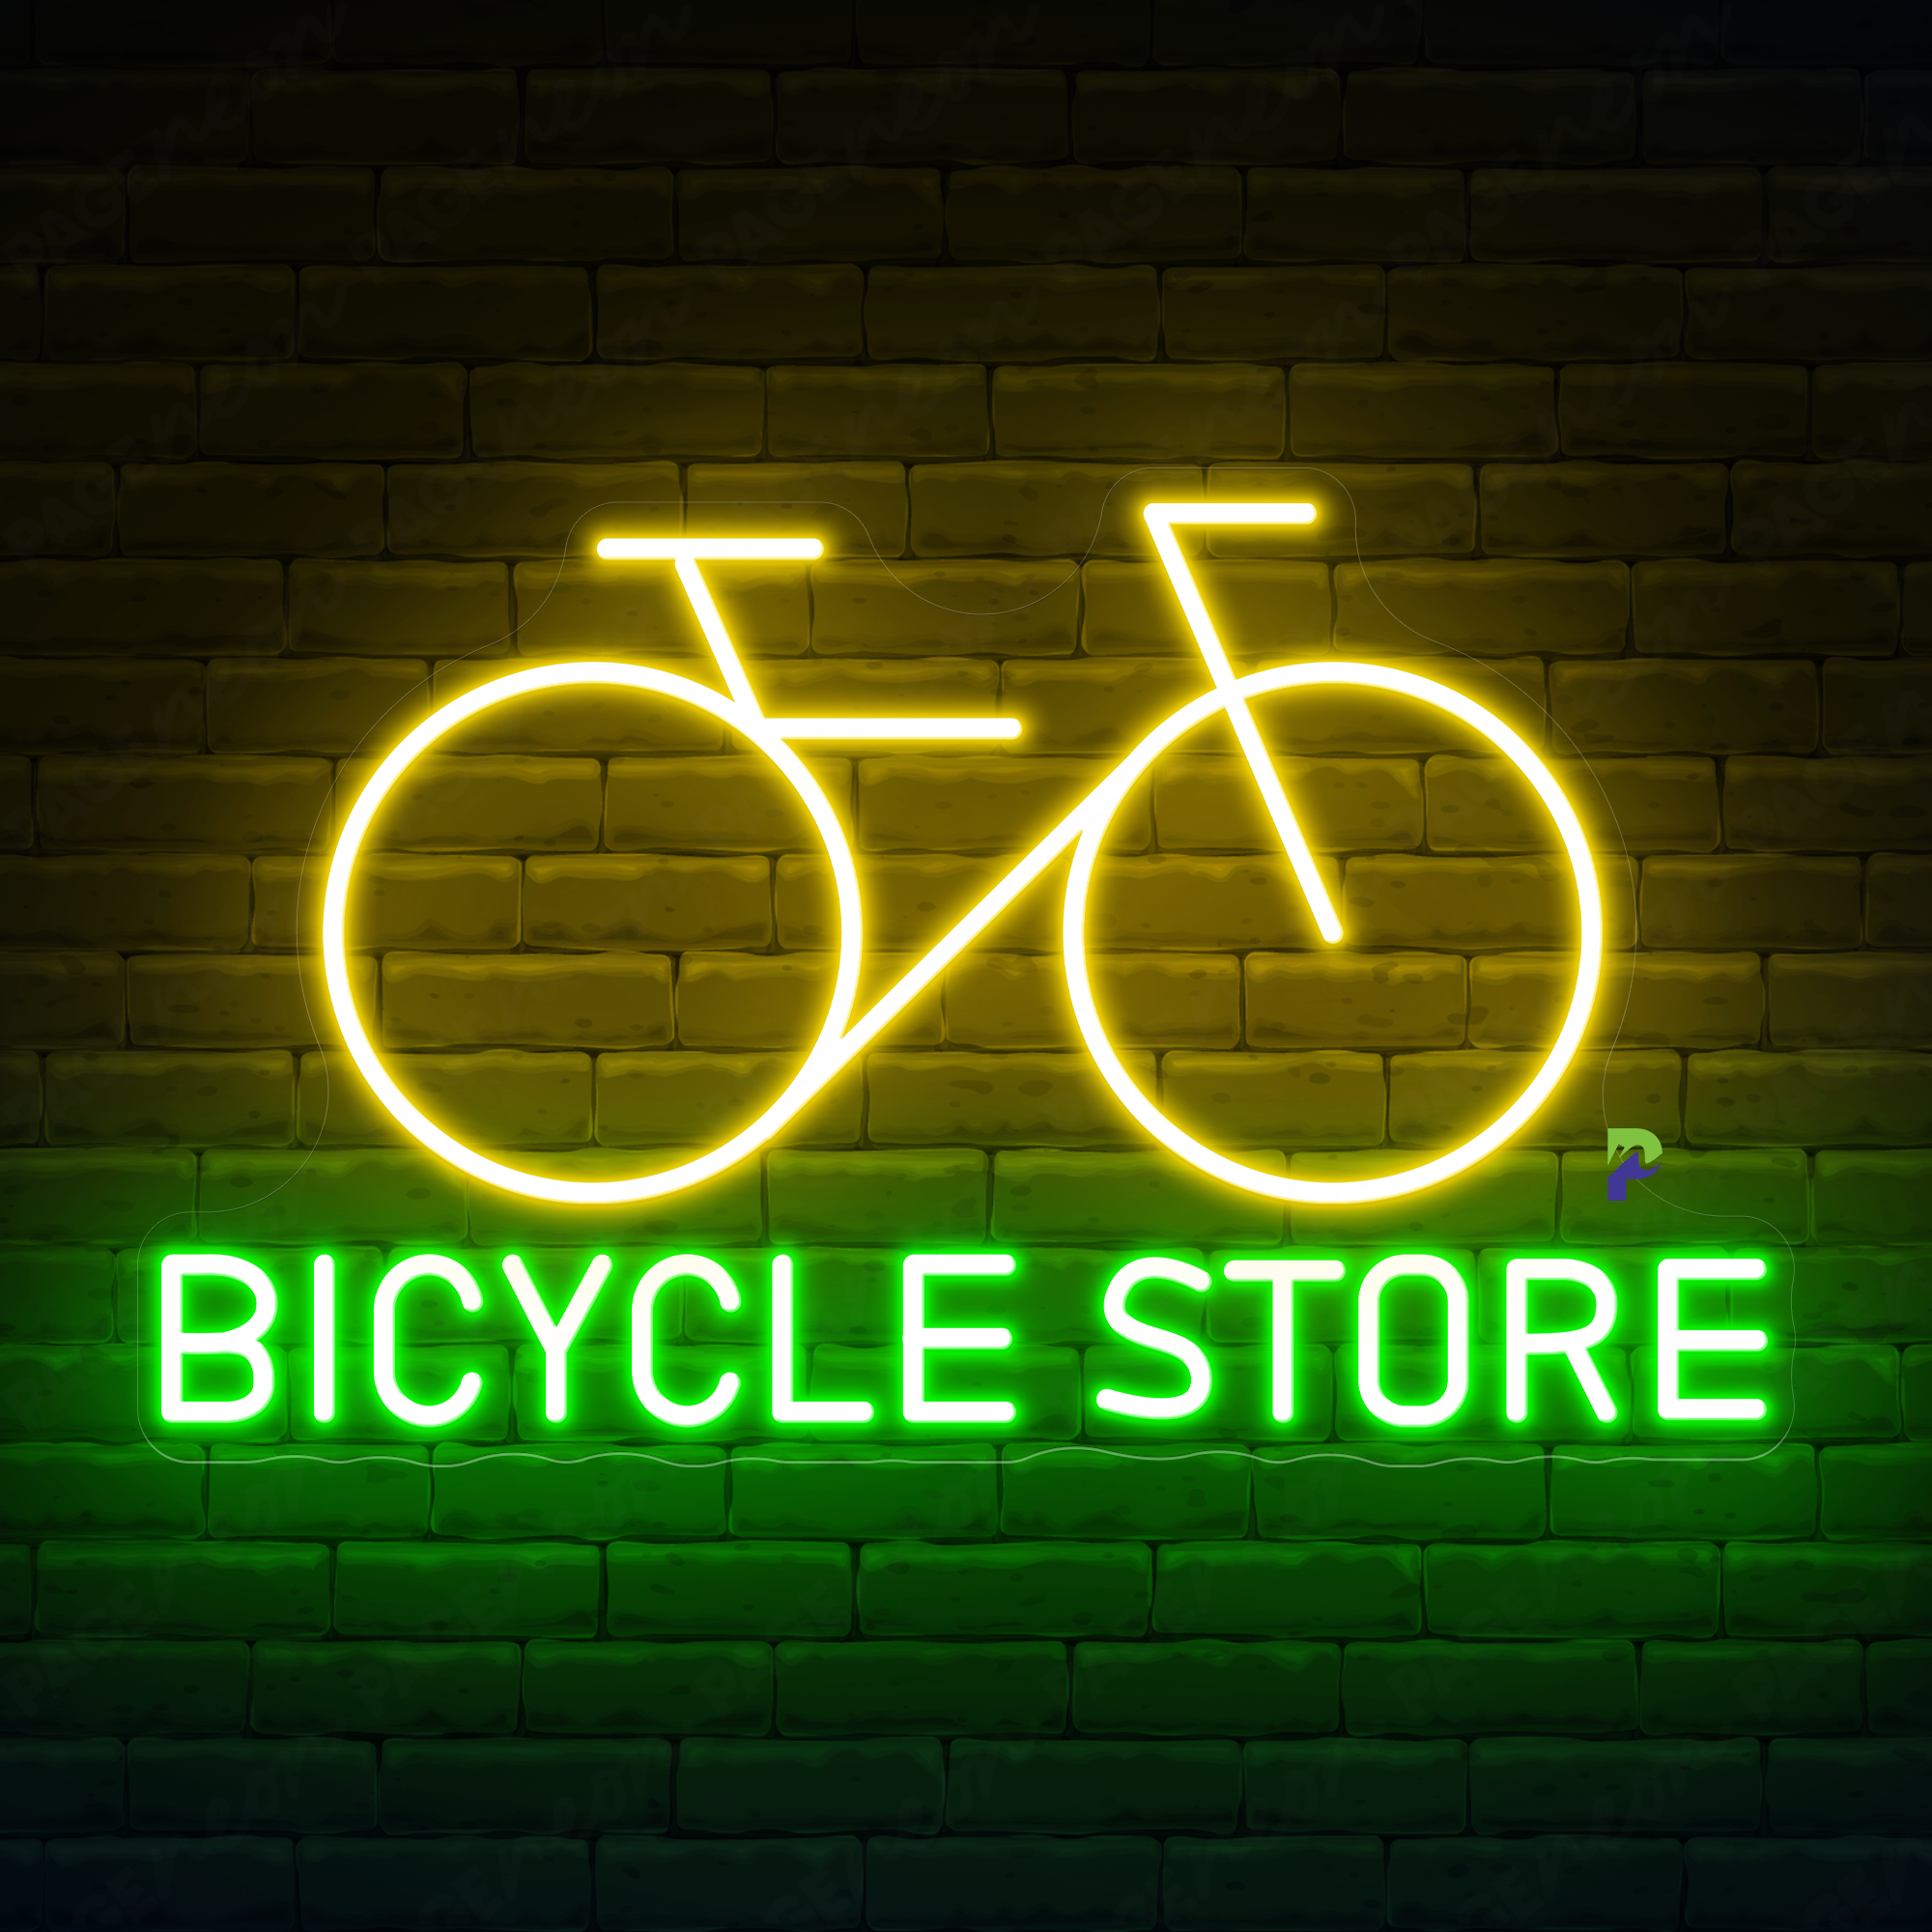 Bicycle Store Neon Signs Business Led Light